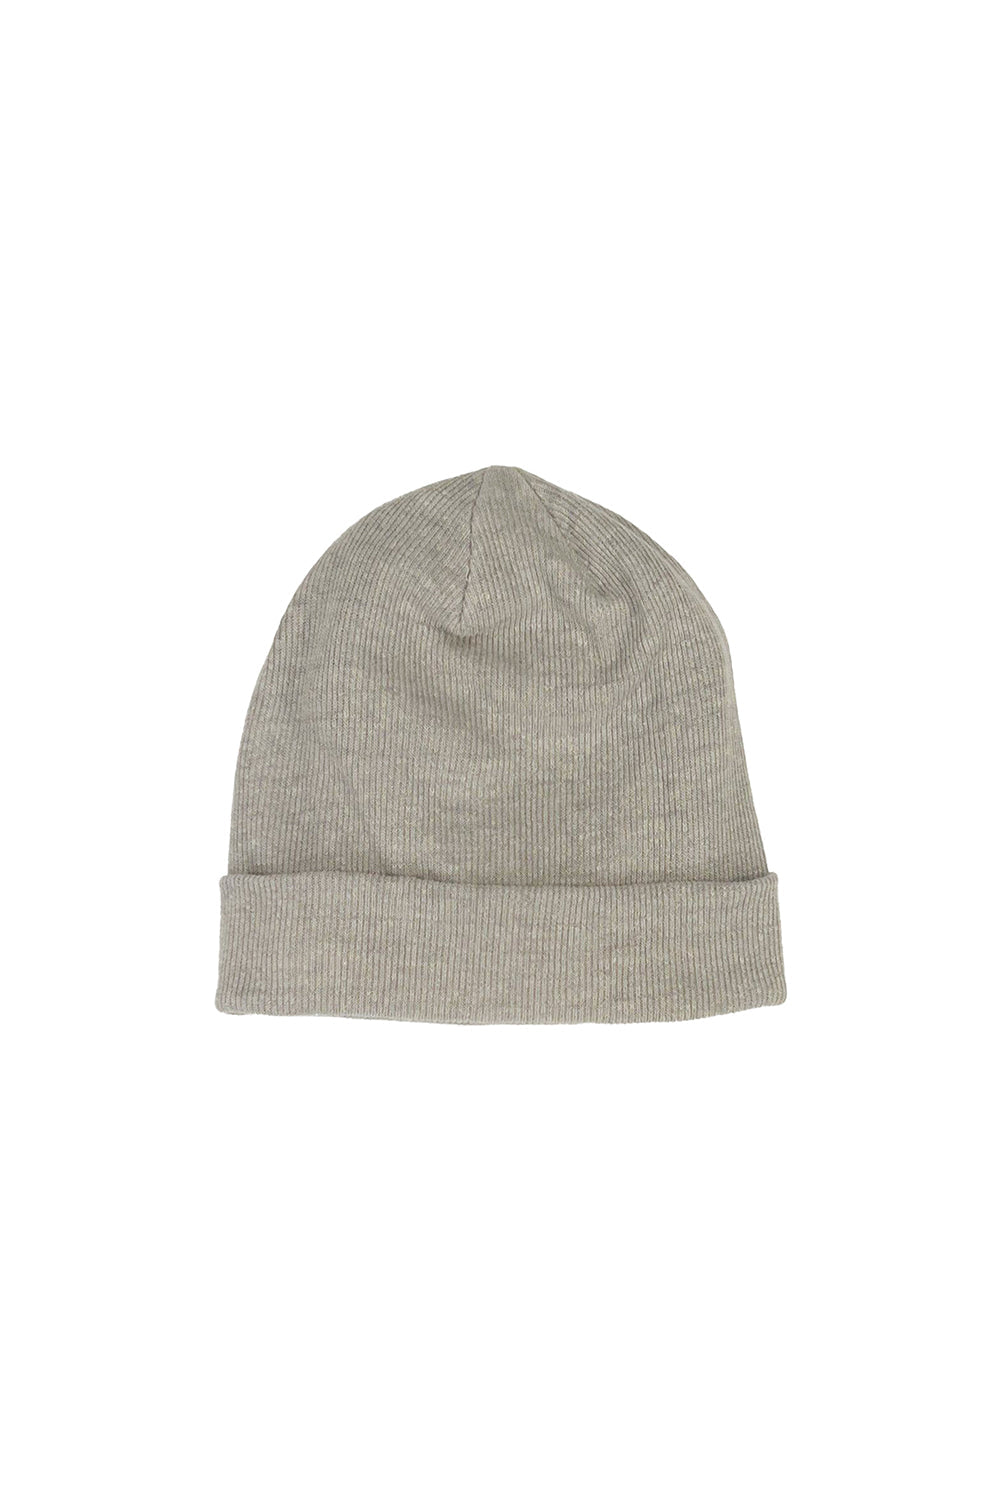 A classic fisherman-style beanie, the Walla Walla made with an itch-free and super soft Hemp and Merino Wool blend. These two superpower fibers come together with natural antibacterial and moisture-wicking properties– to keep you comfortable in almost any condition. Made in California.